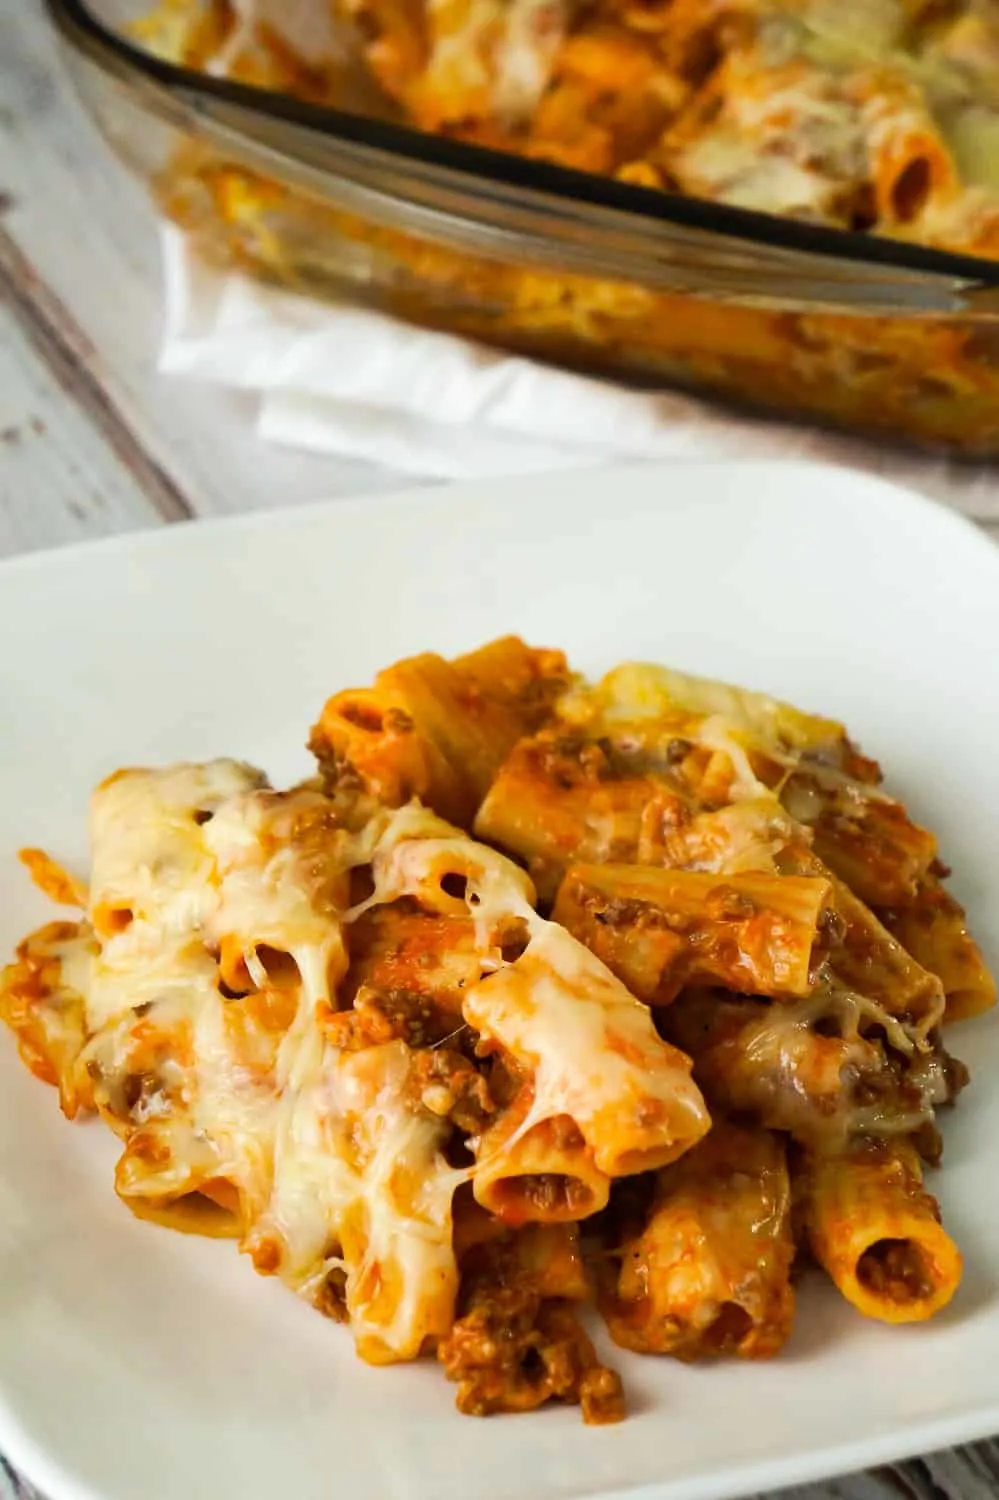 Baked Rigatoni Bolognese is an easy pasta dinner recipe loaded with cheese. This pasta with ground beef and marinara sauce, is topped with Mozzarella and Parmesan cheese.